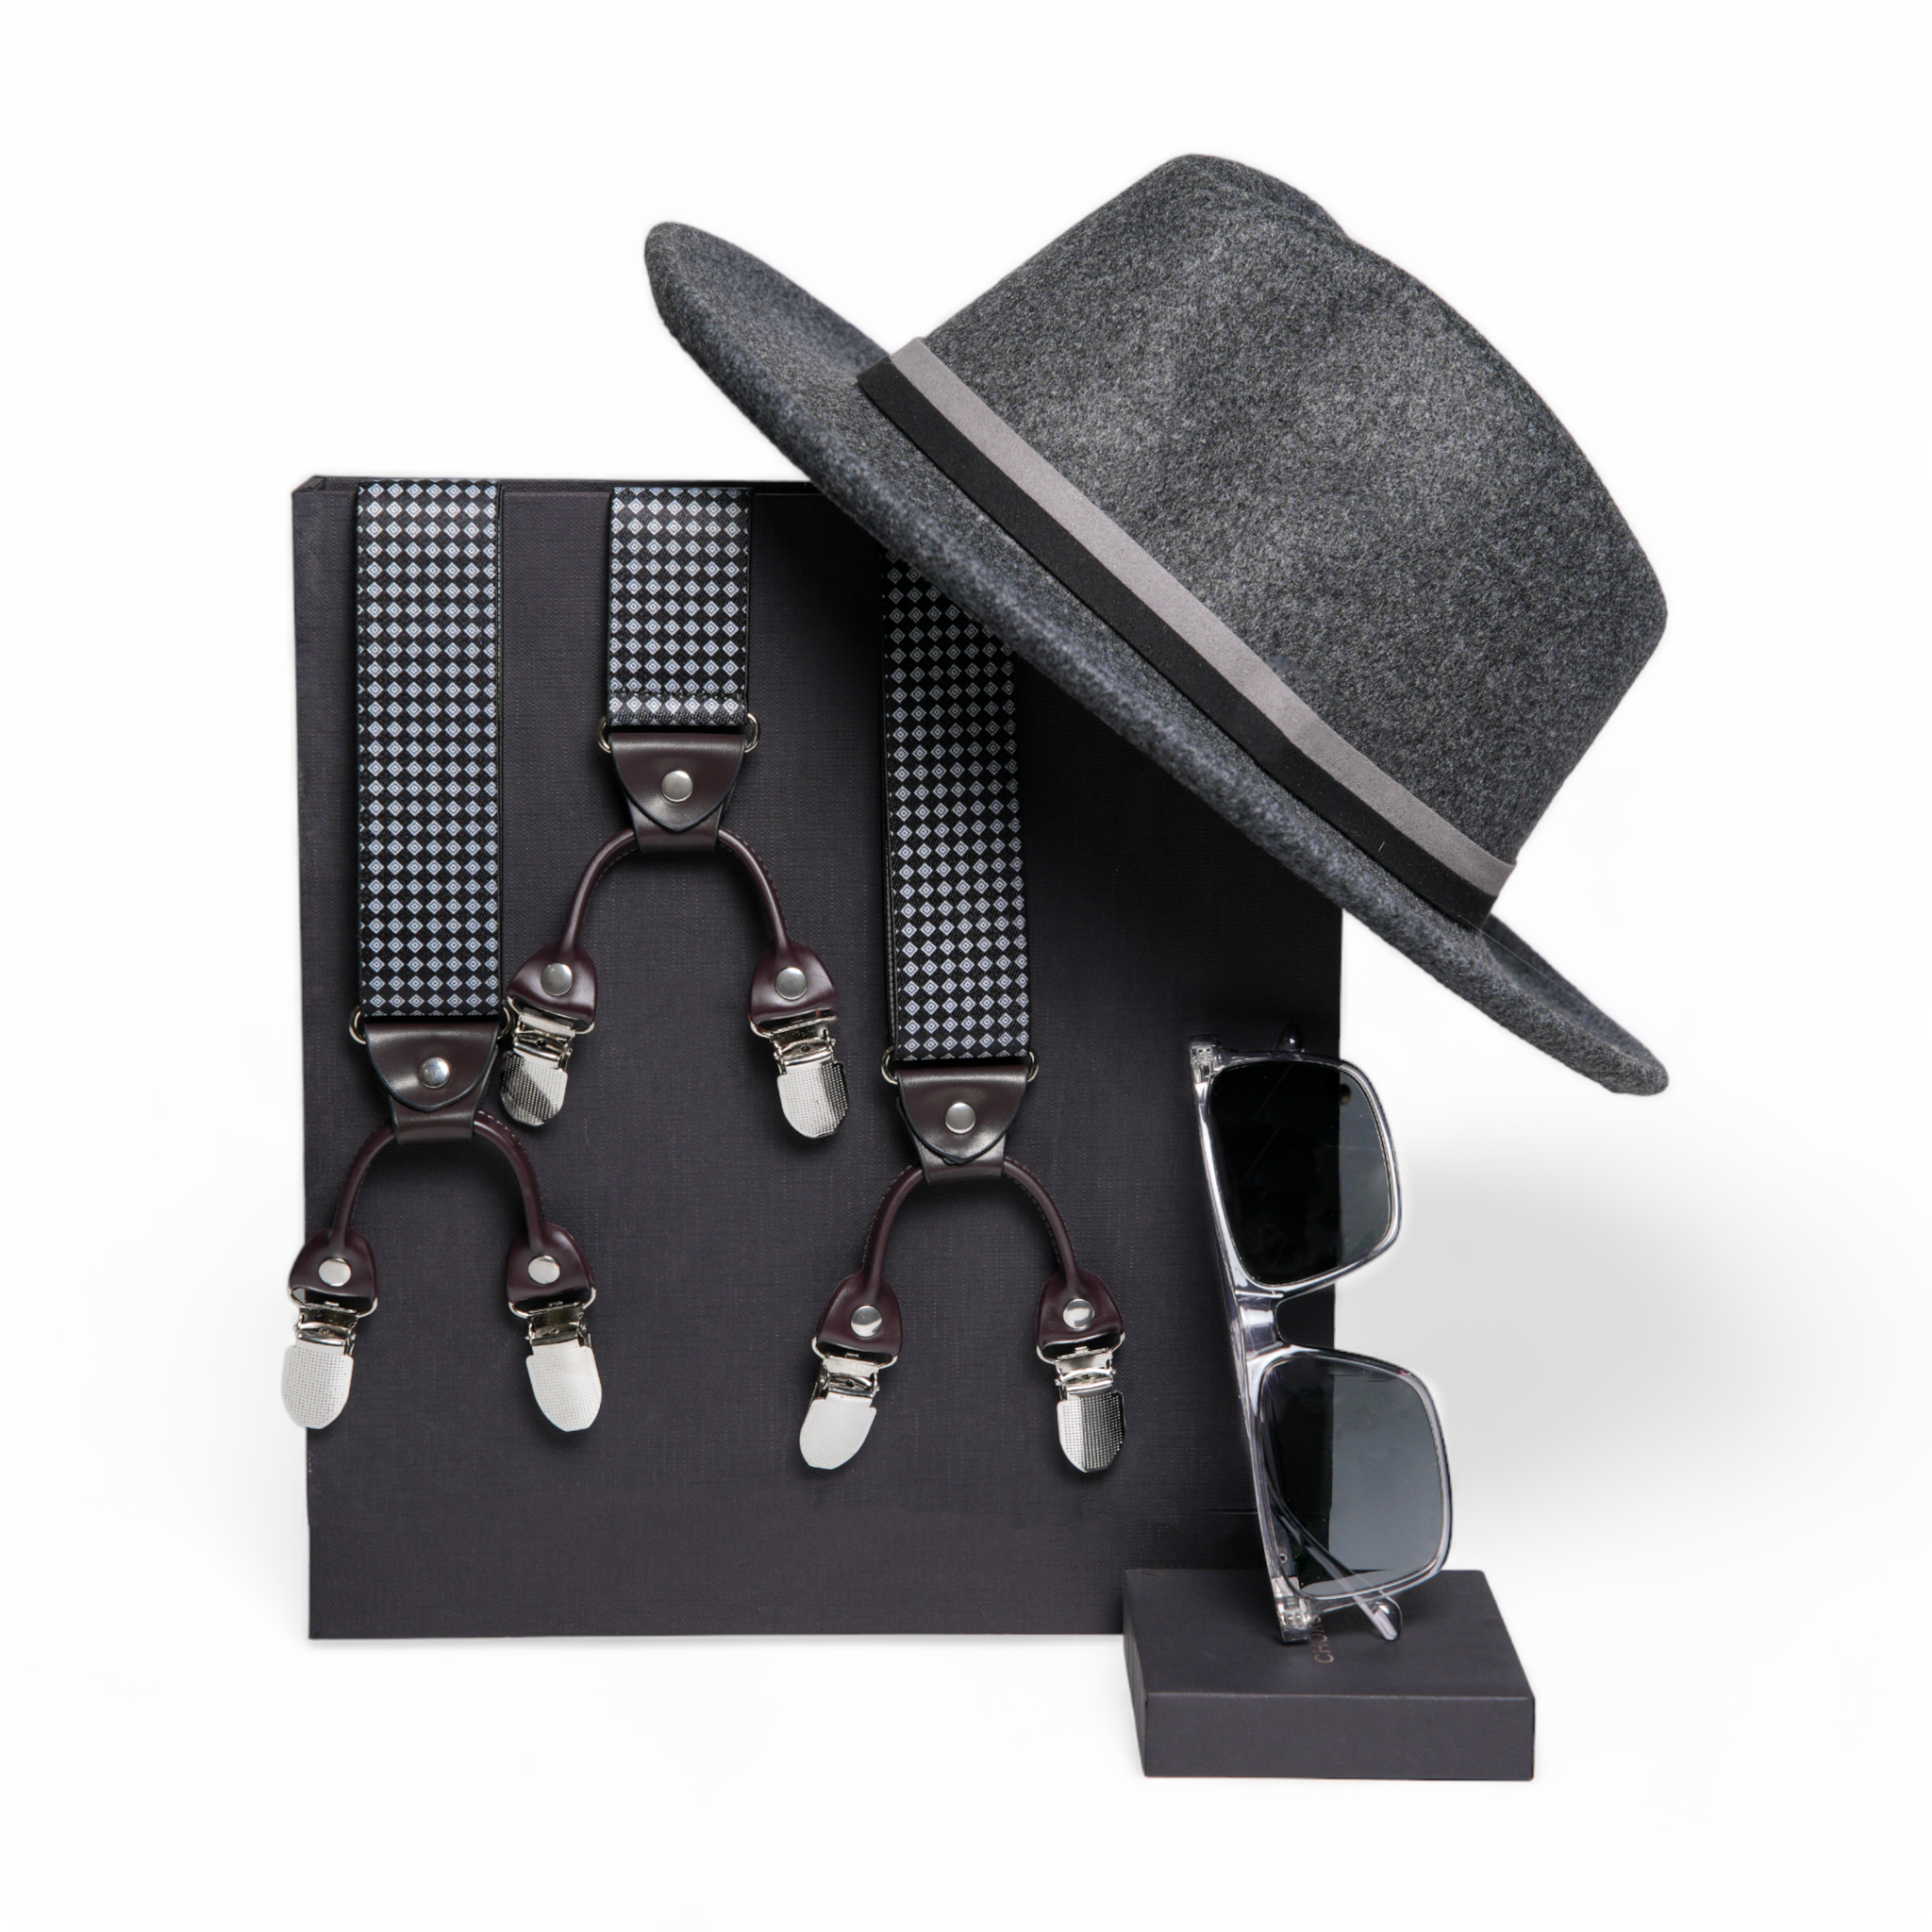 Chokore Special 3-in-1 Gift Set for Him (Black and White Suspenders, Fedora Hat, & Sunglasses)